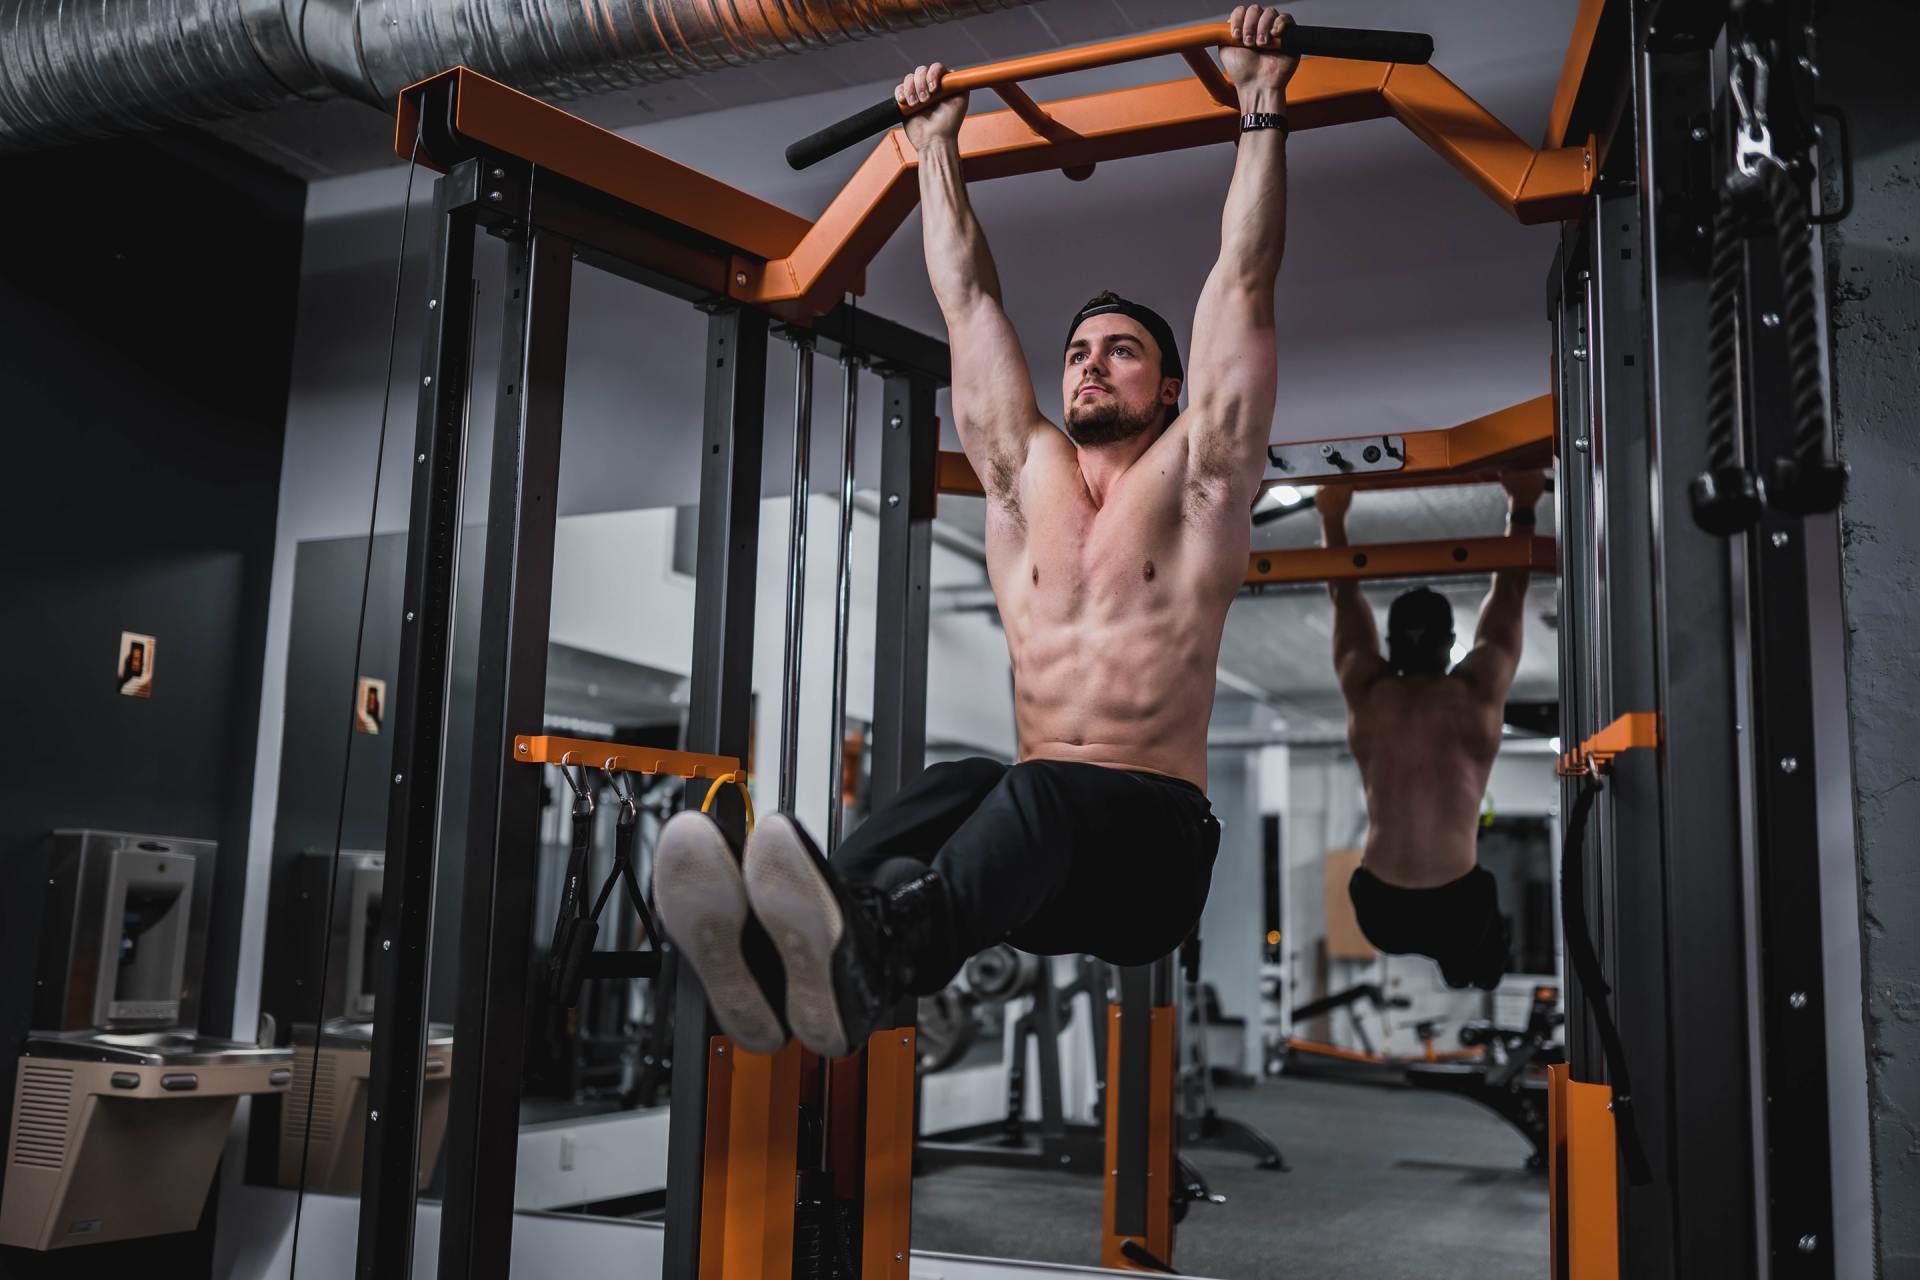 Image of Muscular Male Exercising in Gym, Doing Abdominal Exercises